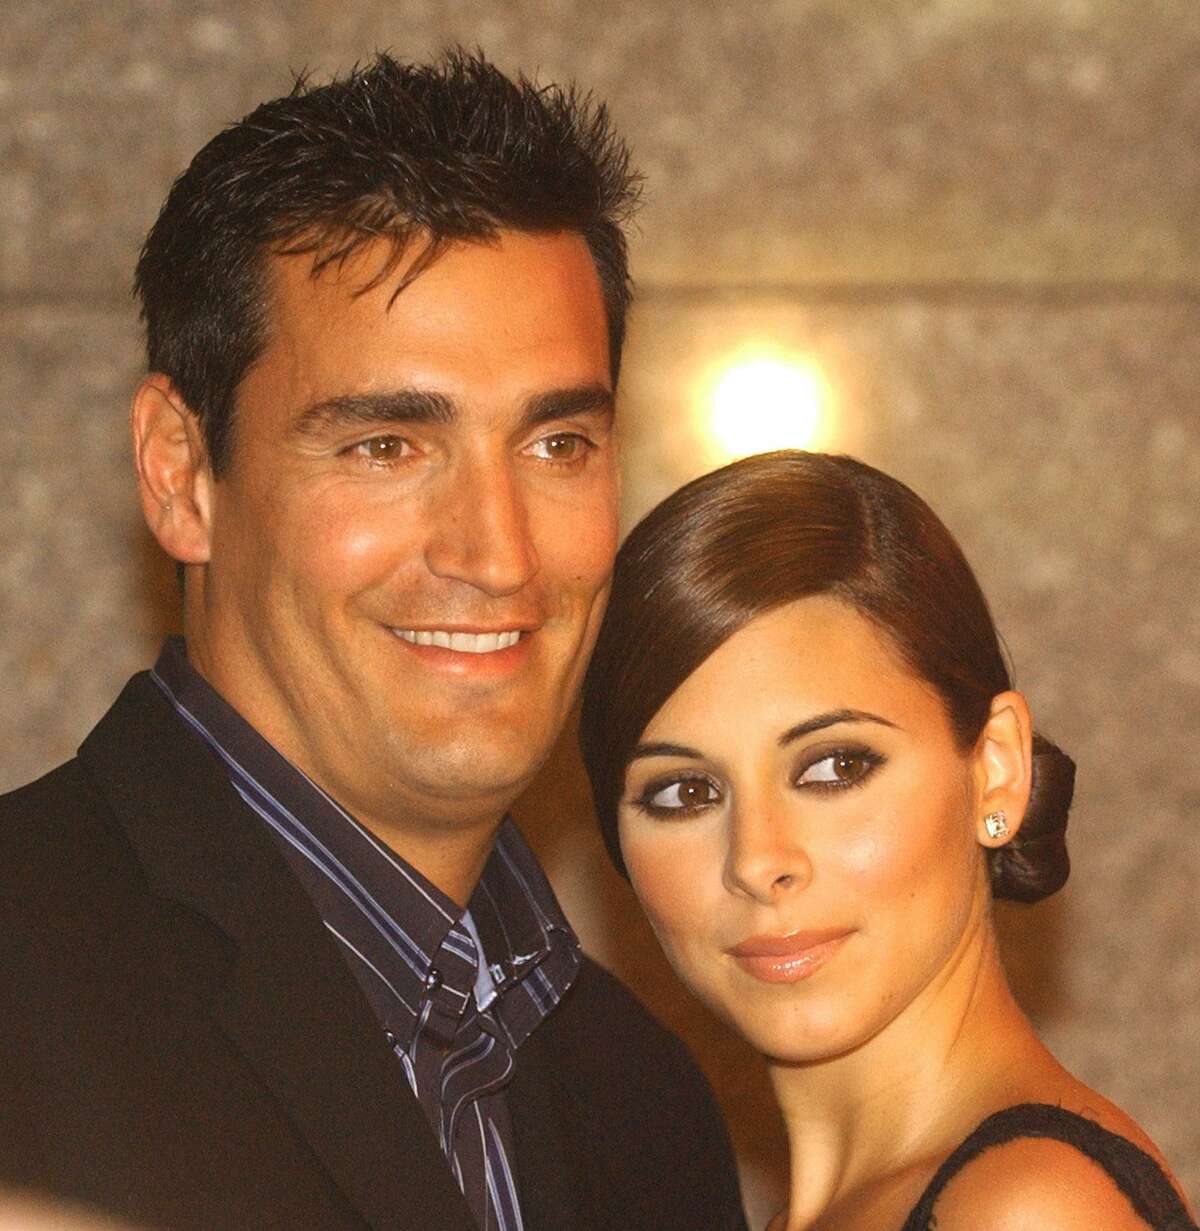 Actress Jamie-Lynn DiScala, who plays Meadow Soprano, and her husband A.J. DiScala arrive for the fifth season premiere of the HBO series "The Sopranos," Tuesday, March 2, 2004, at New York's Radio City Music Hall.